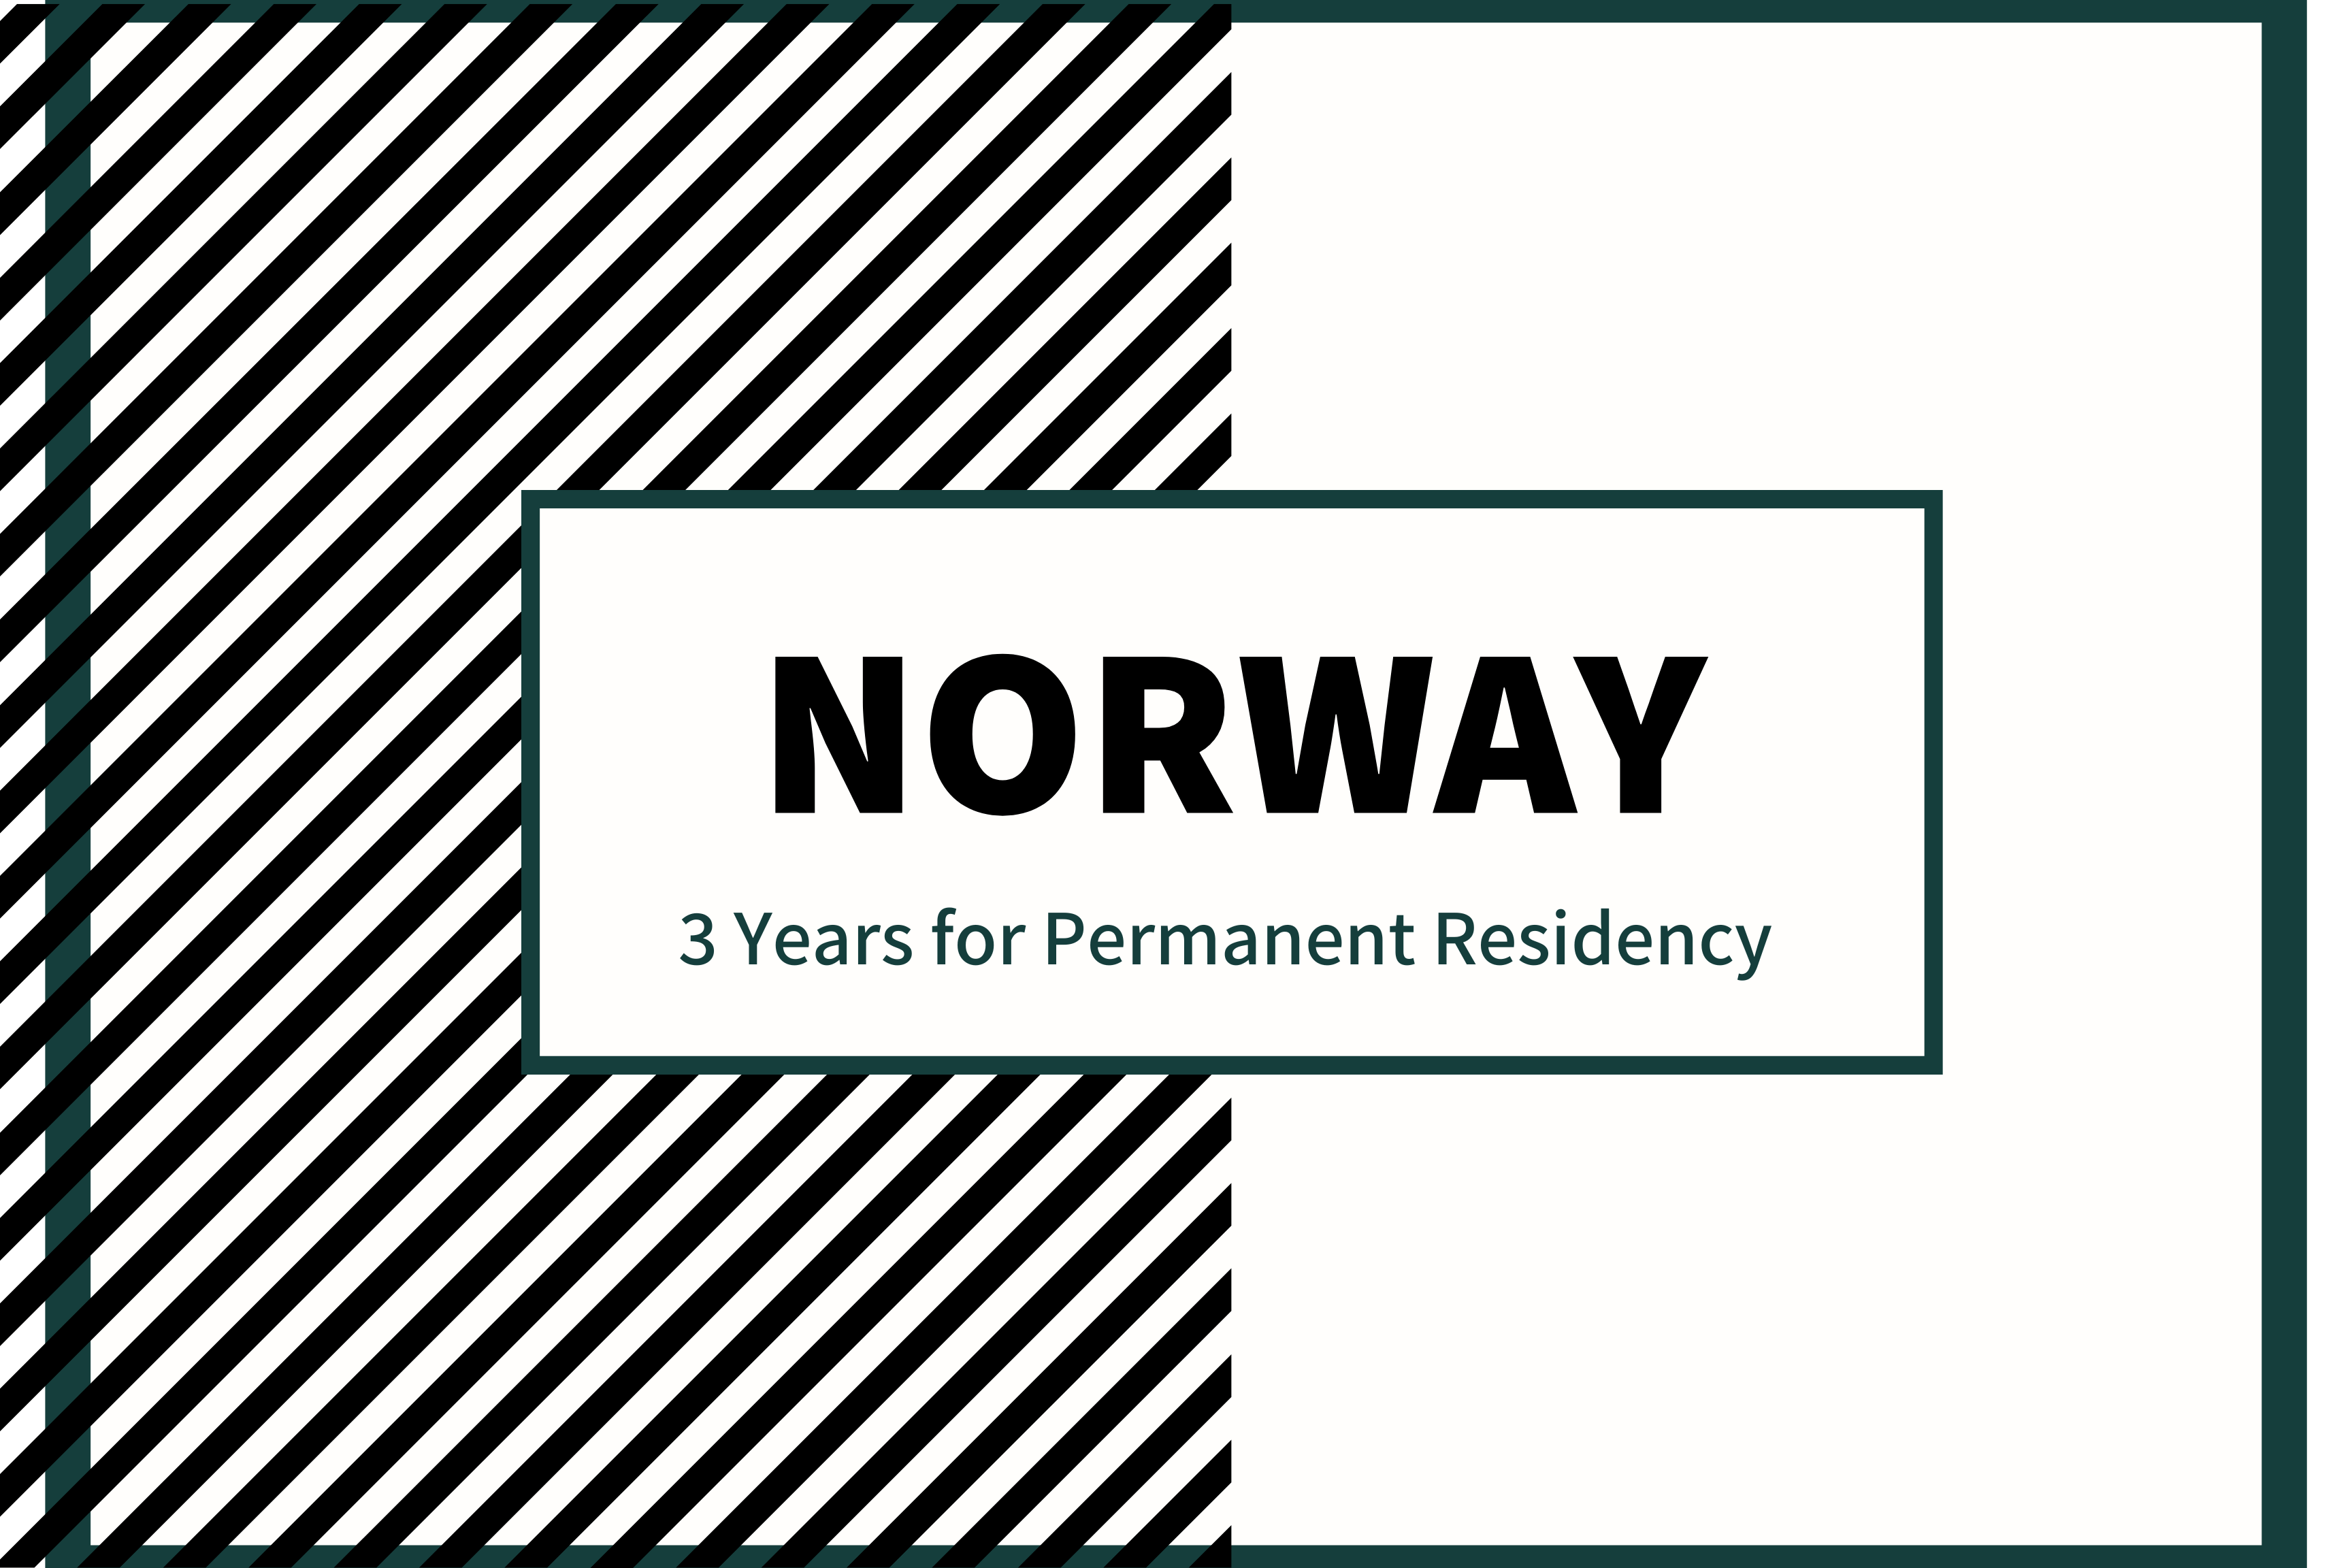 norway permanent residency in 3 years and citizenship in 6 years